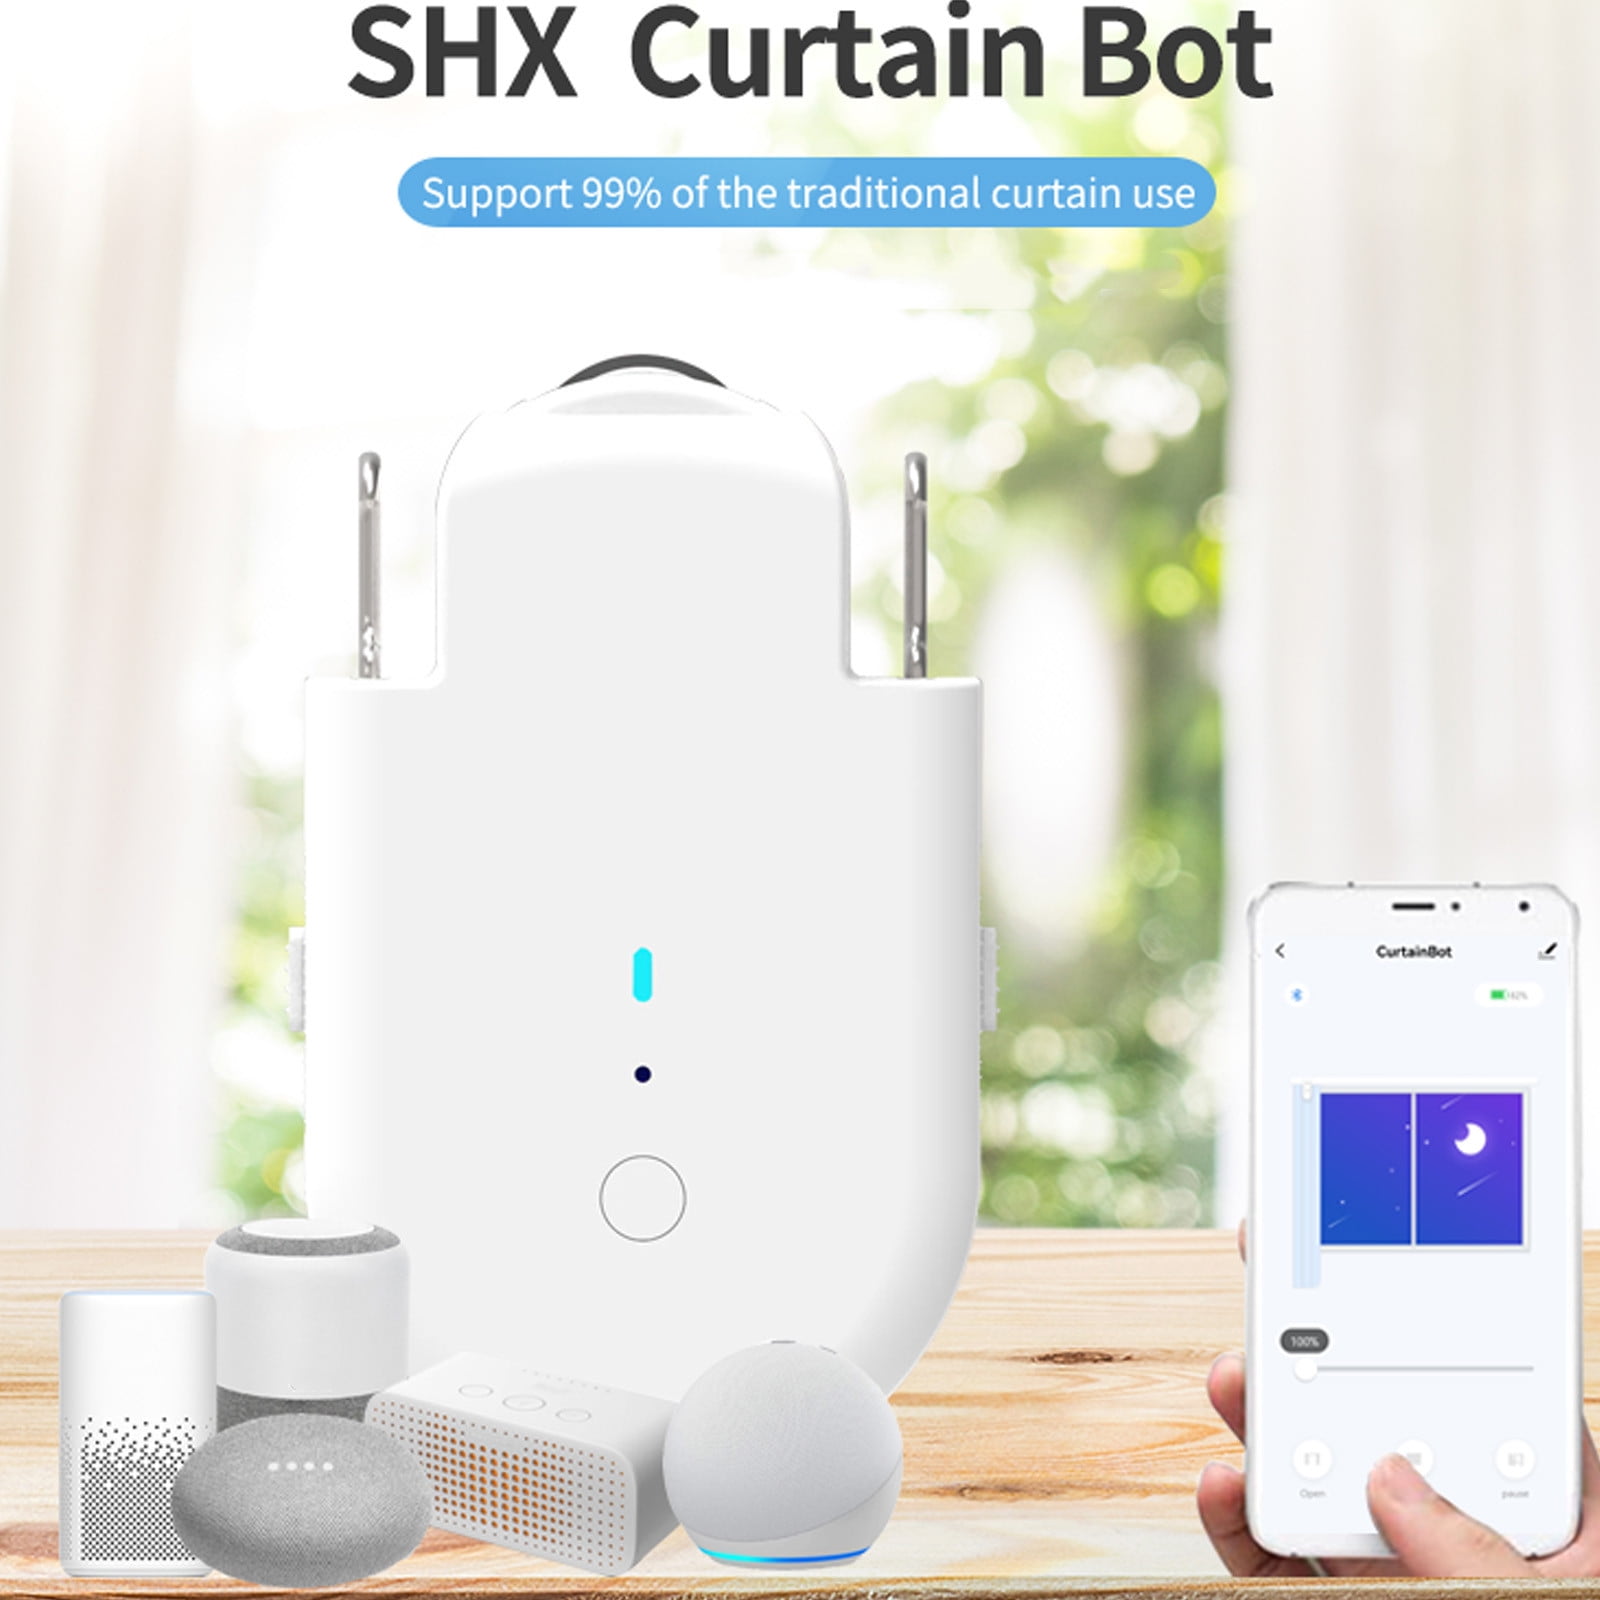 Smart & Automatic Curtain Opener Robot! 😯 